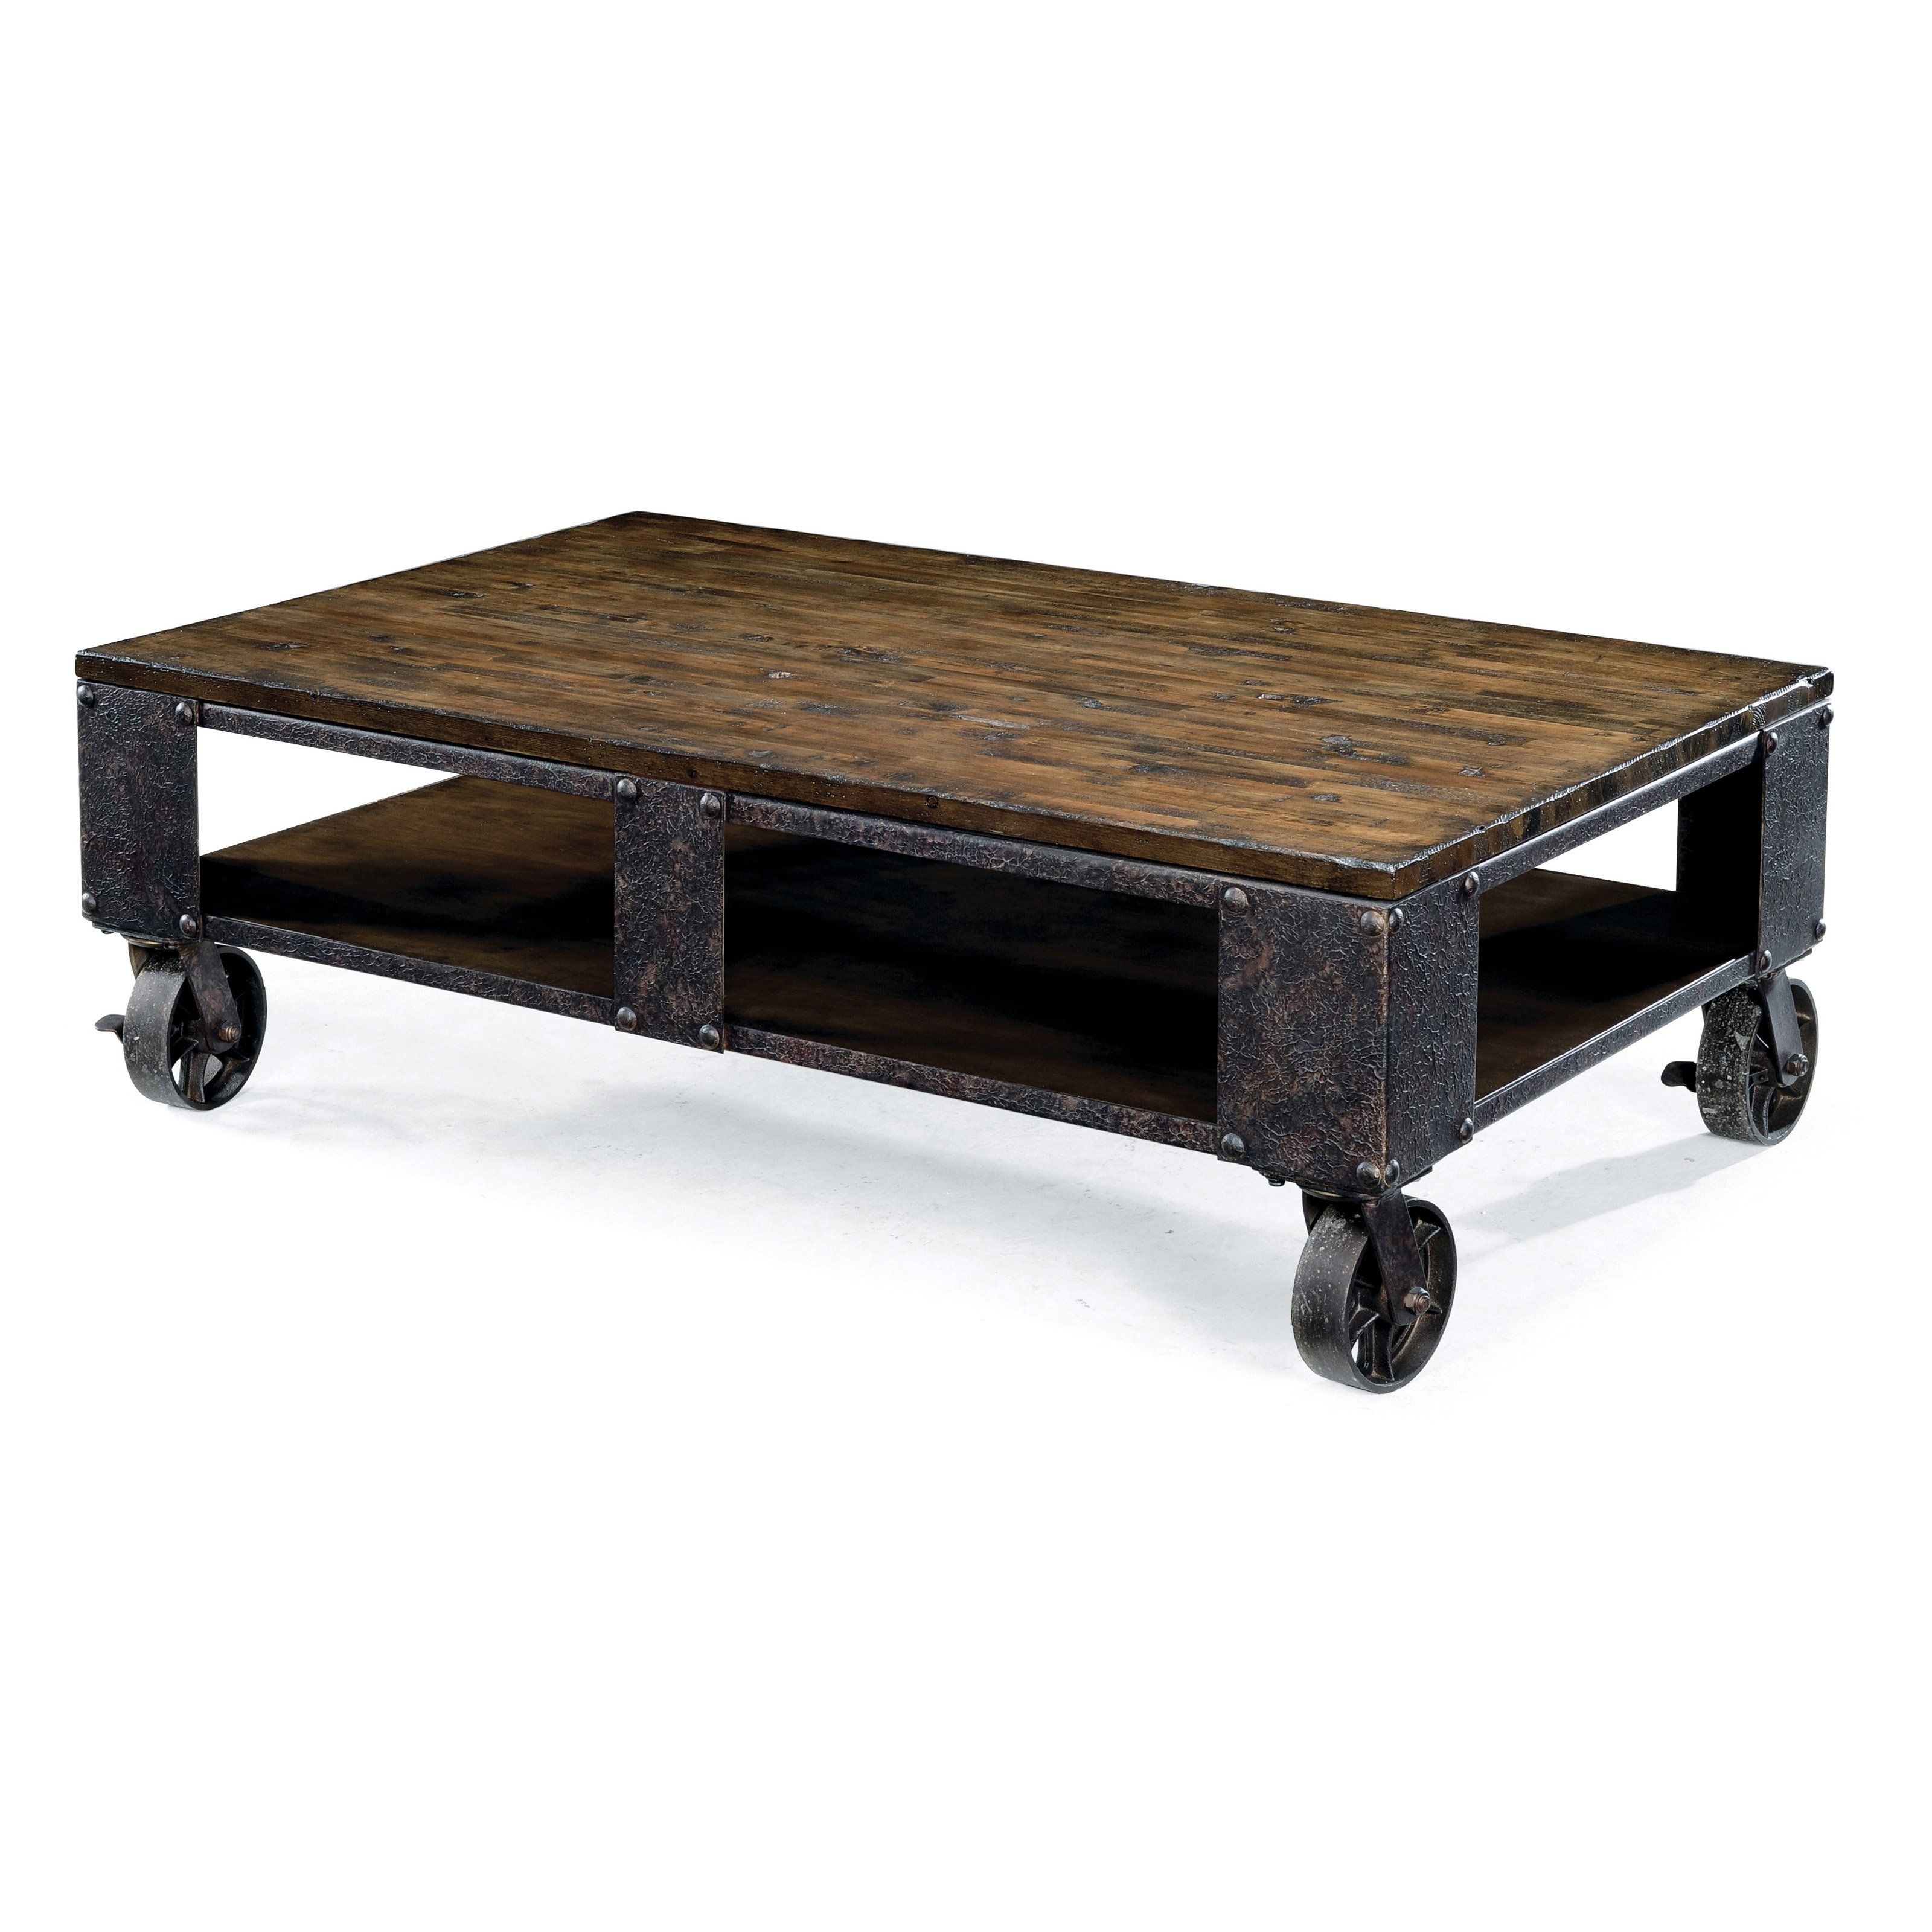 Well Liked Iron Wood Coffee Tables With Wheels Within Coffee Table: Interesting Coffee Table On Wheels Coffee Table On (View 4 of 20)